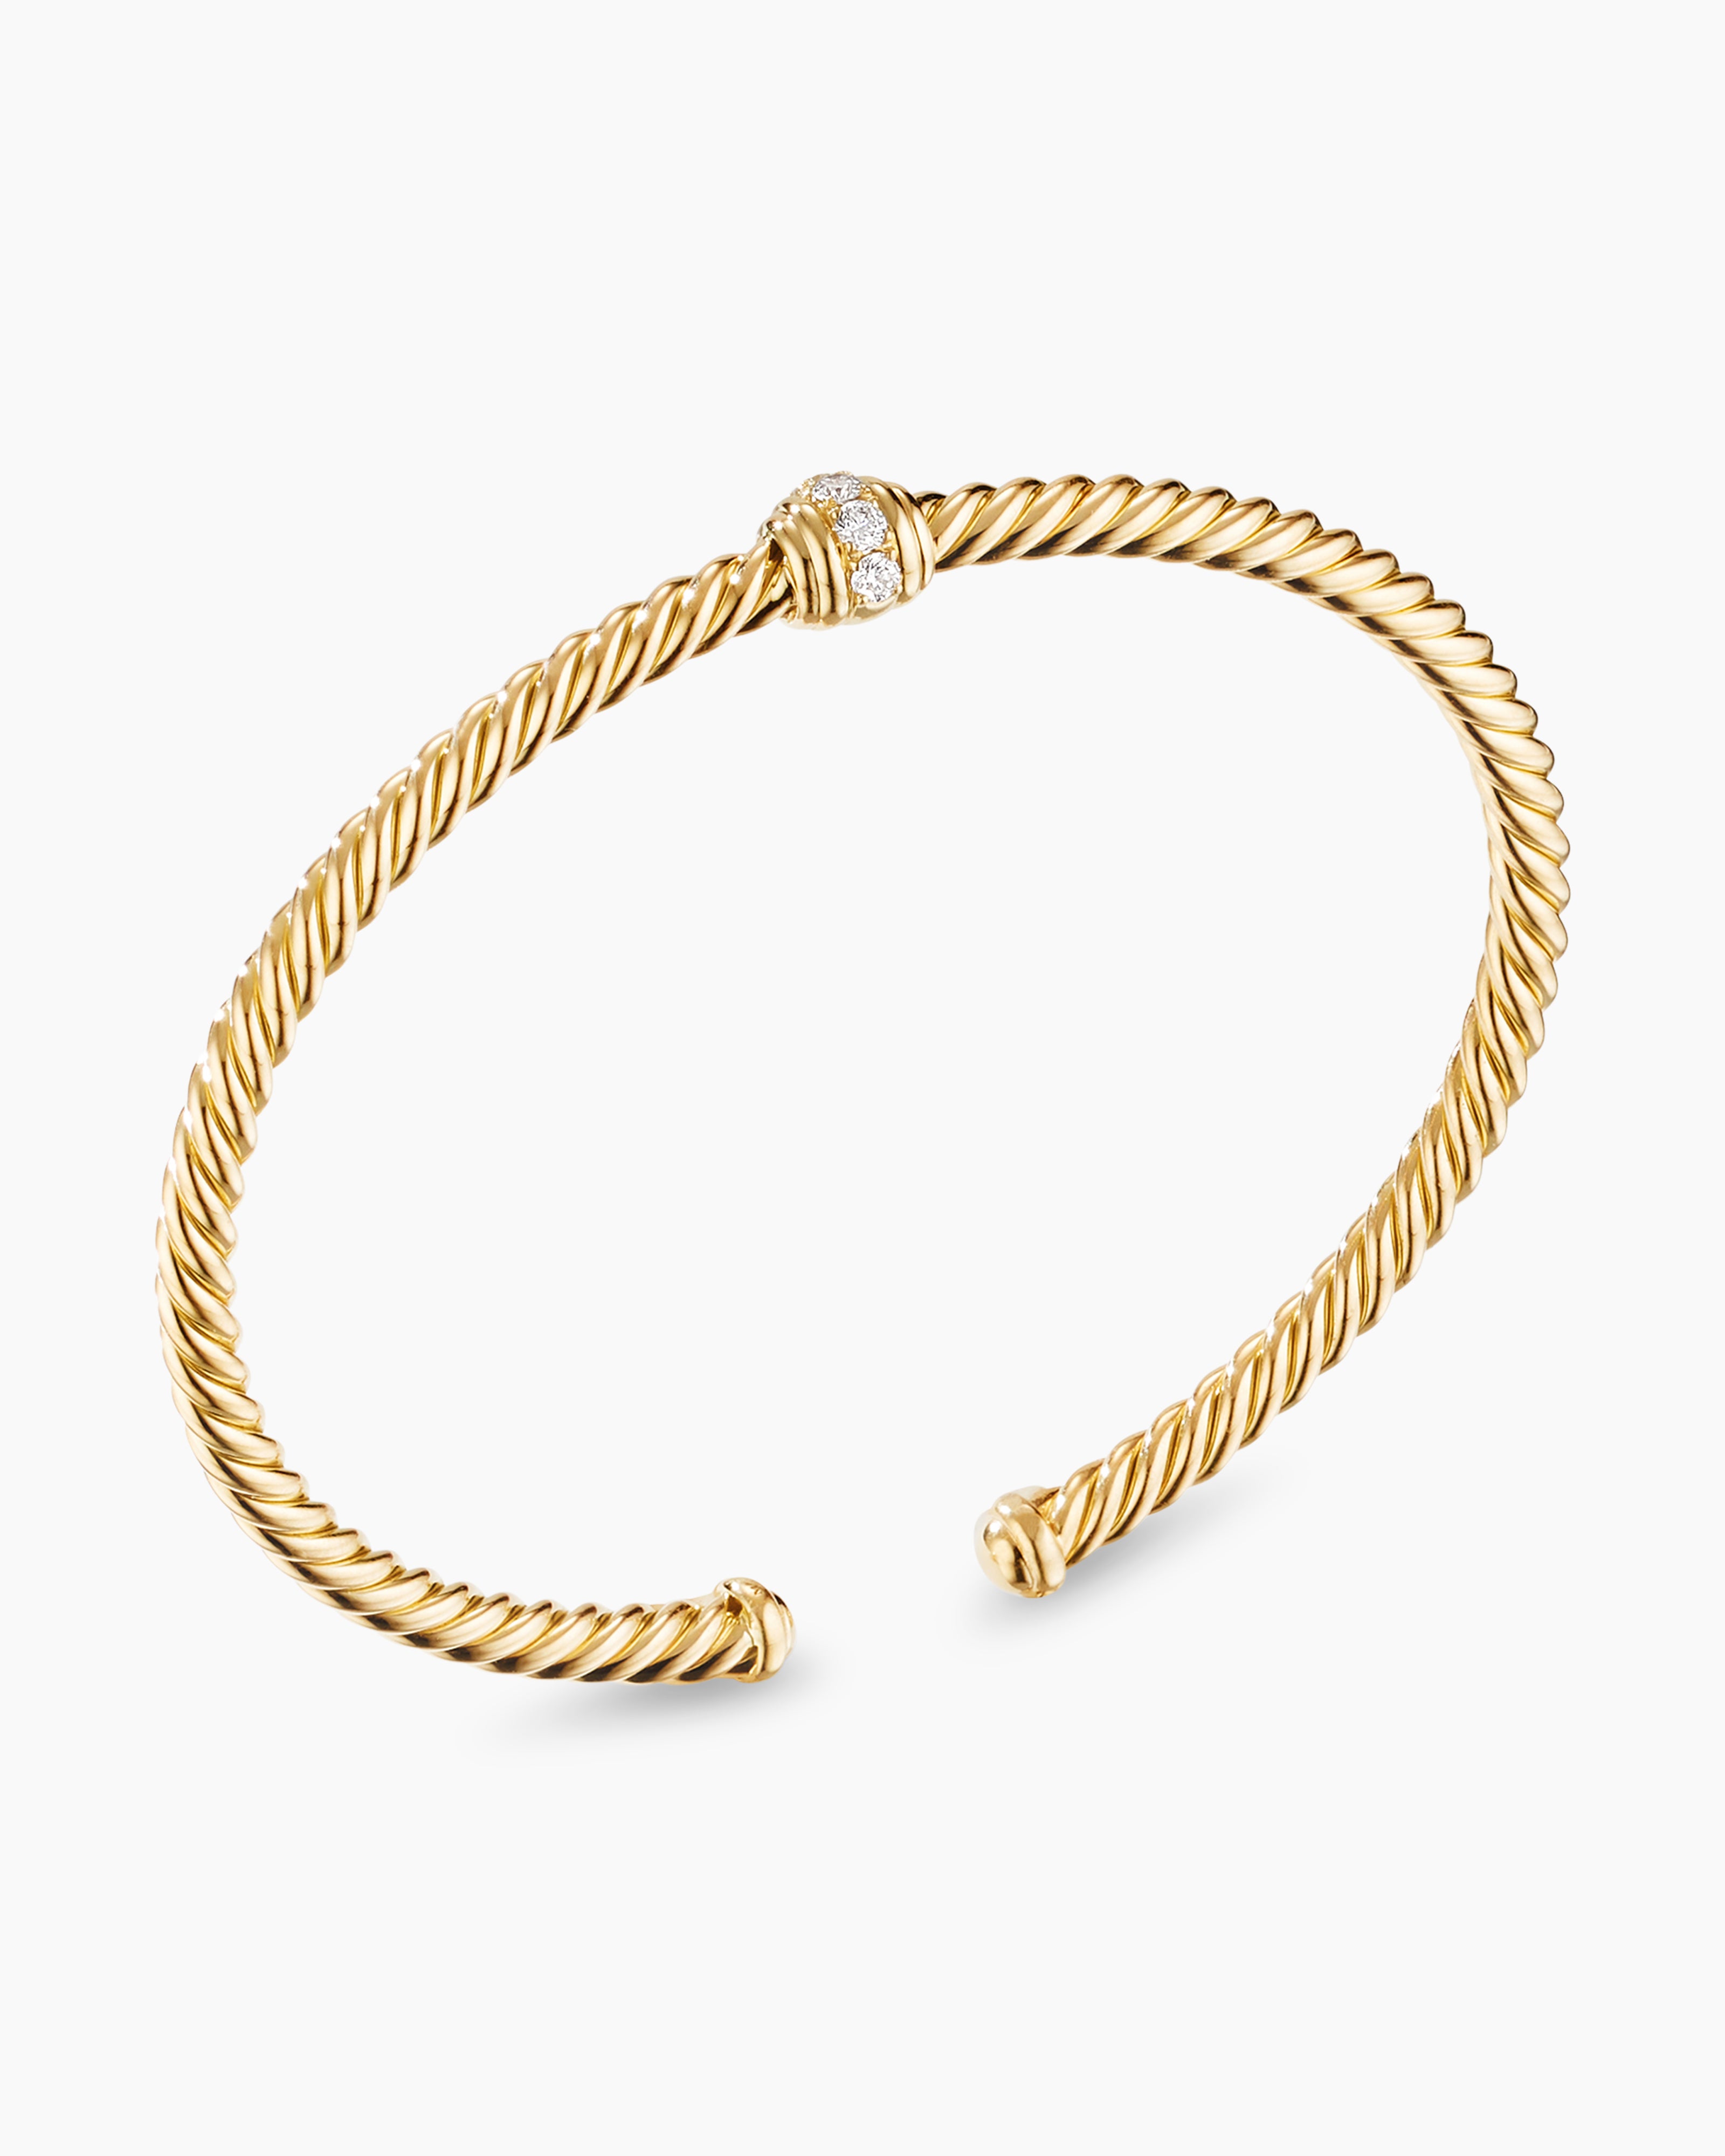 Classic Cablespira Station Bracelet in 18K Yellow Gold with Diamonds, 3 ...